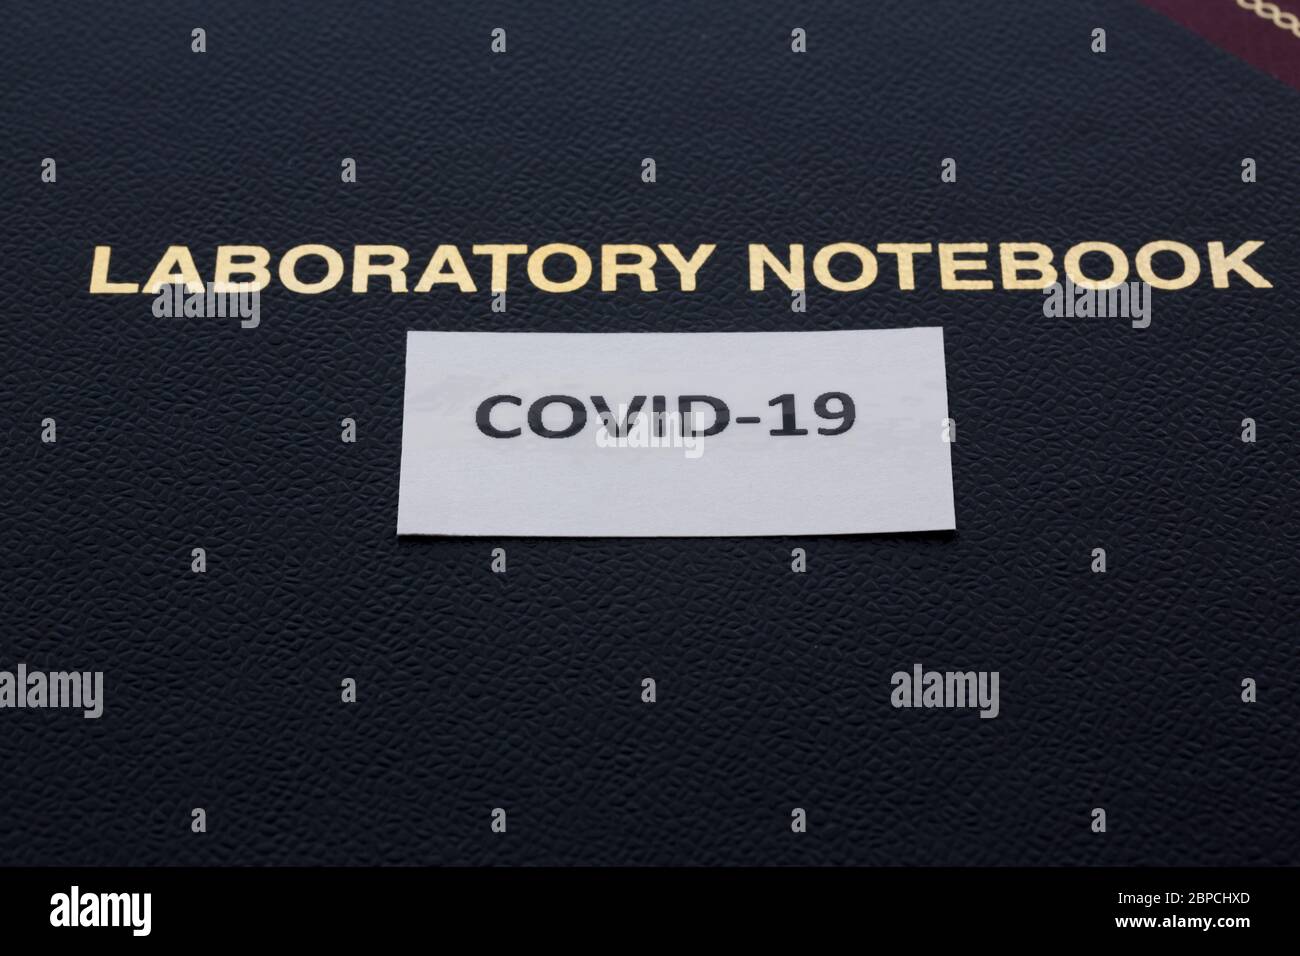 Black lab book of data-based research with LABORATORY NOTEBOOK witten on it with COVID-19 subtitle card added Stock Photo